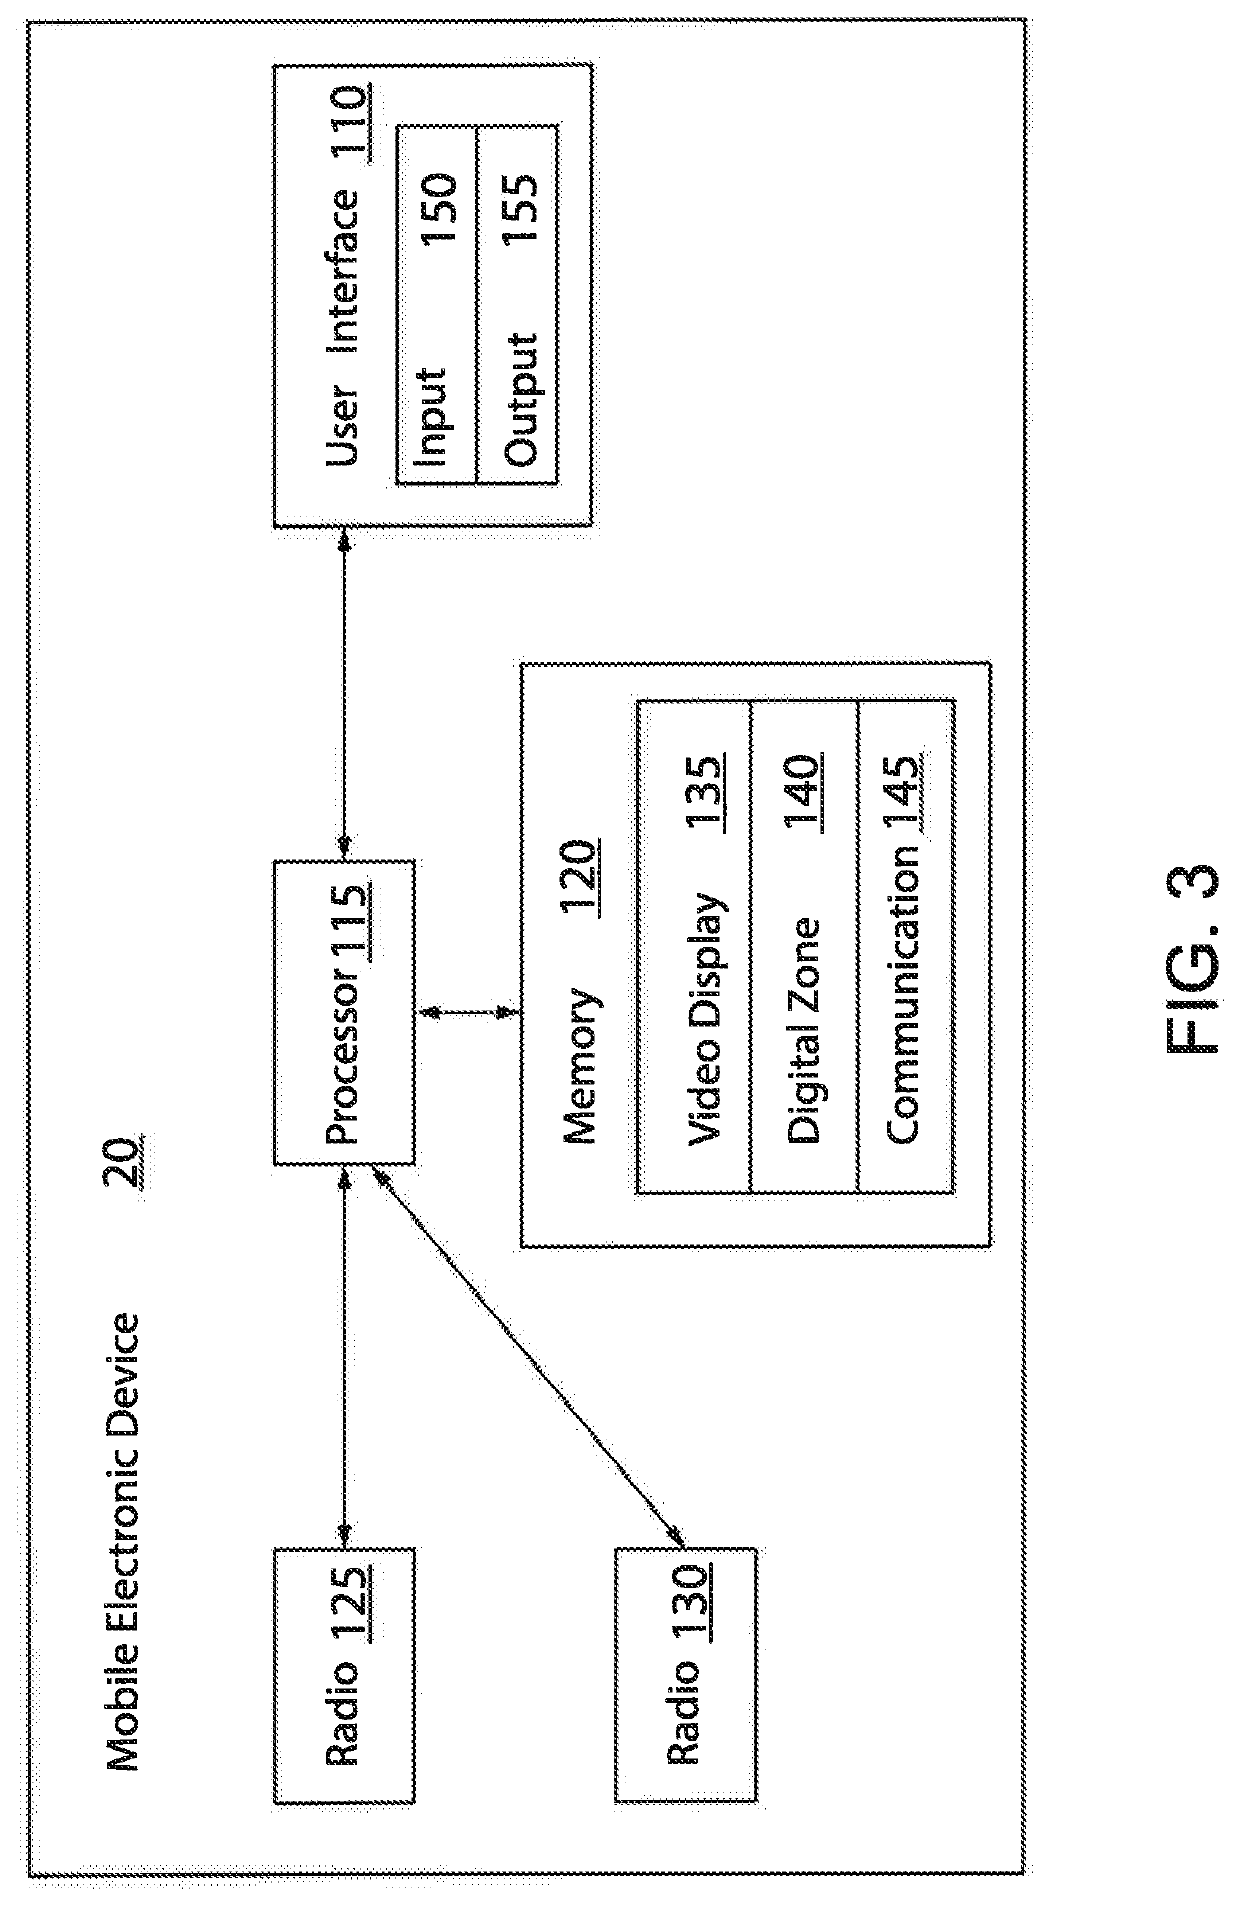 Method Of Communicating Video From A First Electronic Device To A Second Electronic Device Via A Network, And A System Having A Camera And A Mobile Electronic Device For Performing The Method